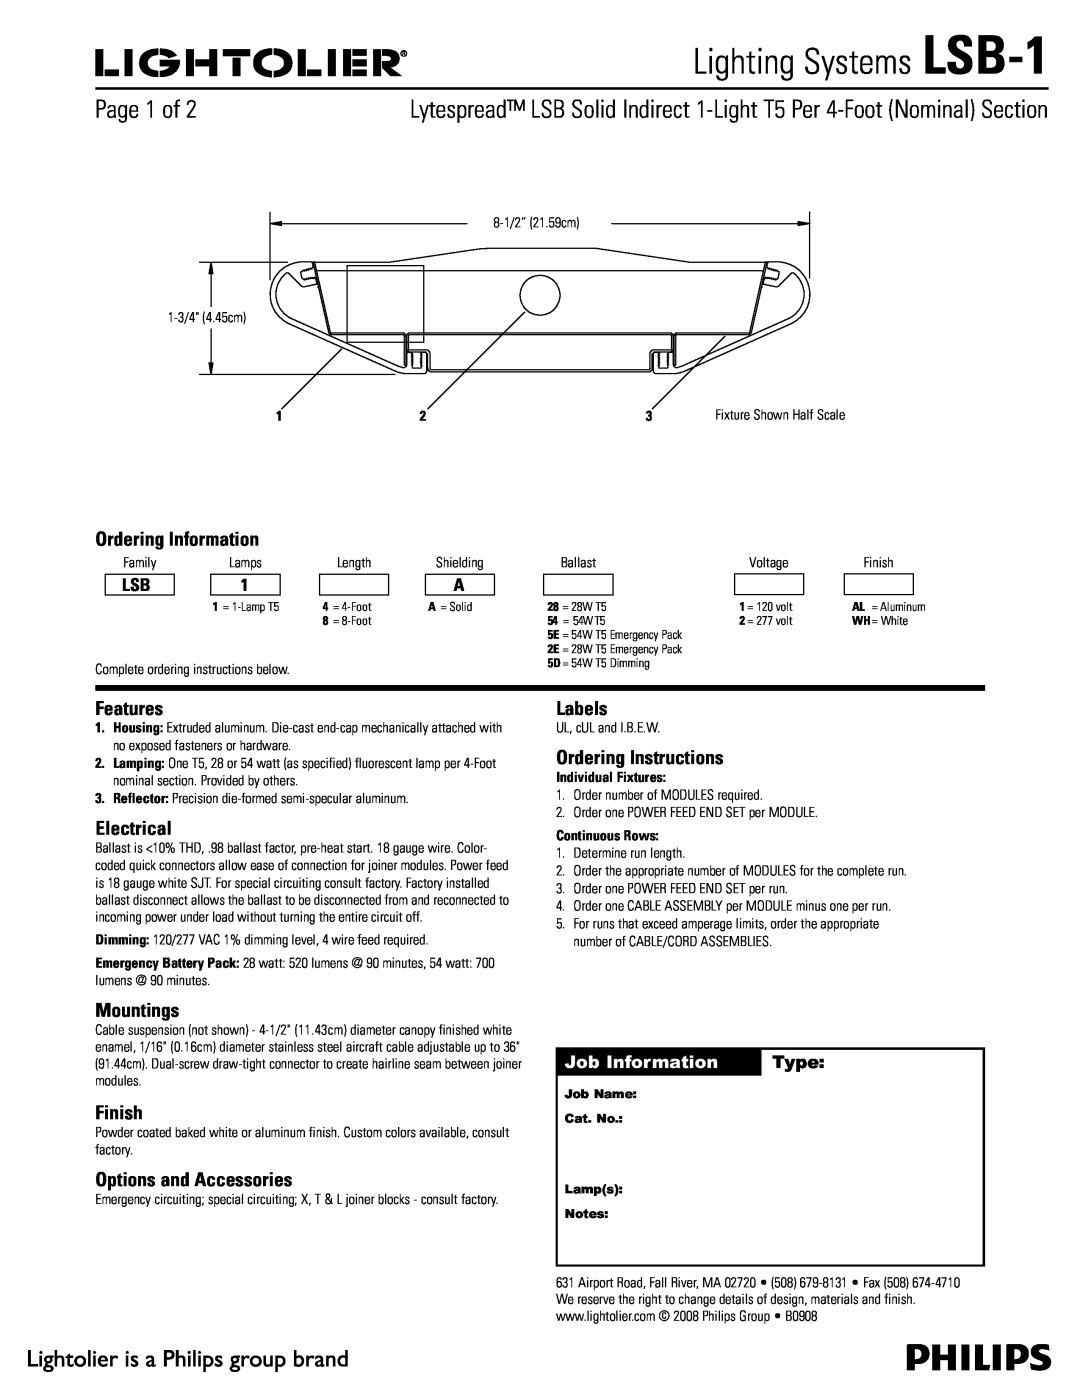 Lightolier LSB-1 manual 1BHFPG, Ordering Information, Features, Electrical, Mountings, Finish, Labels, Type 